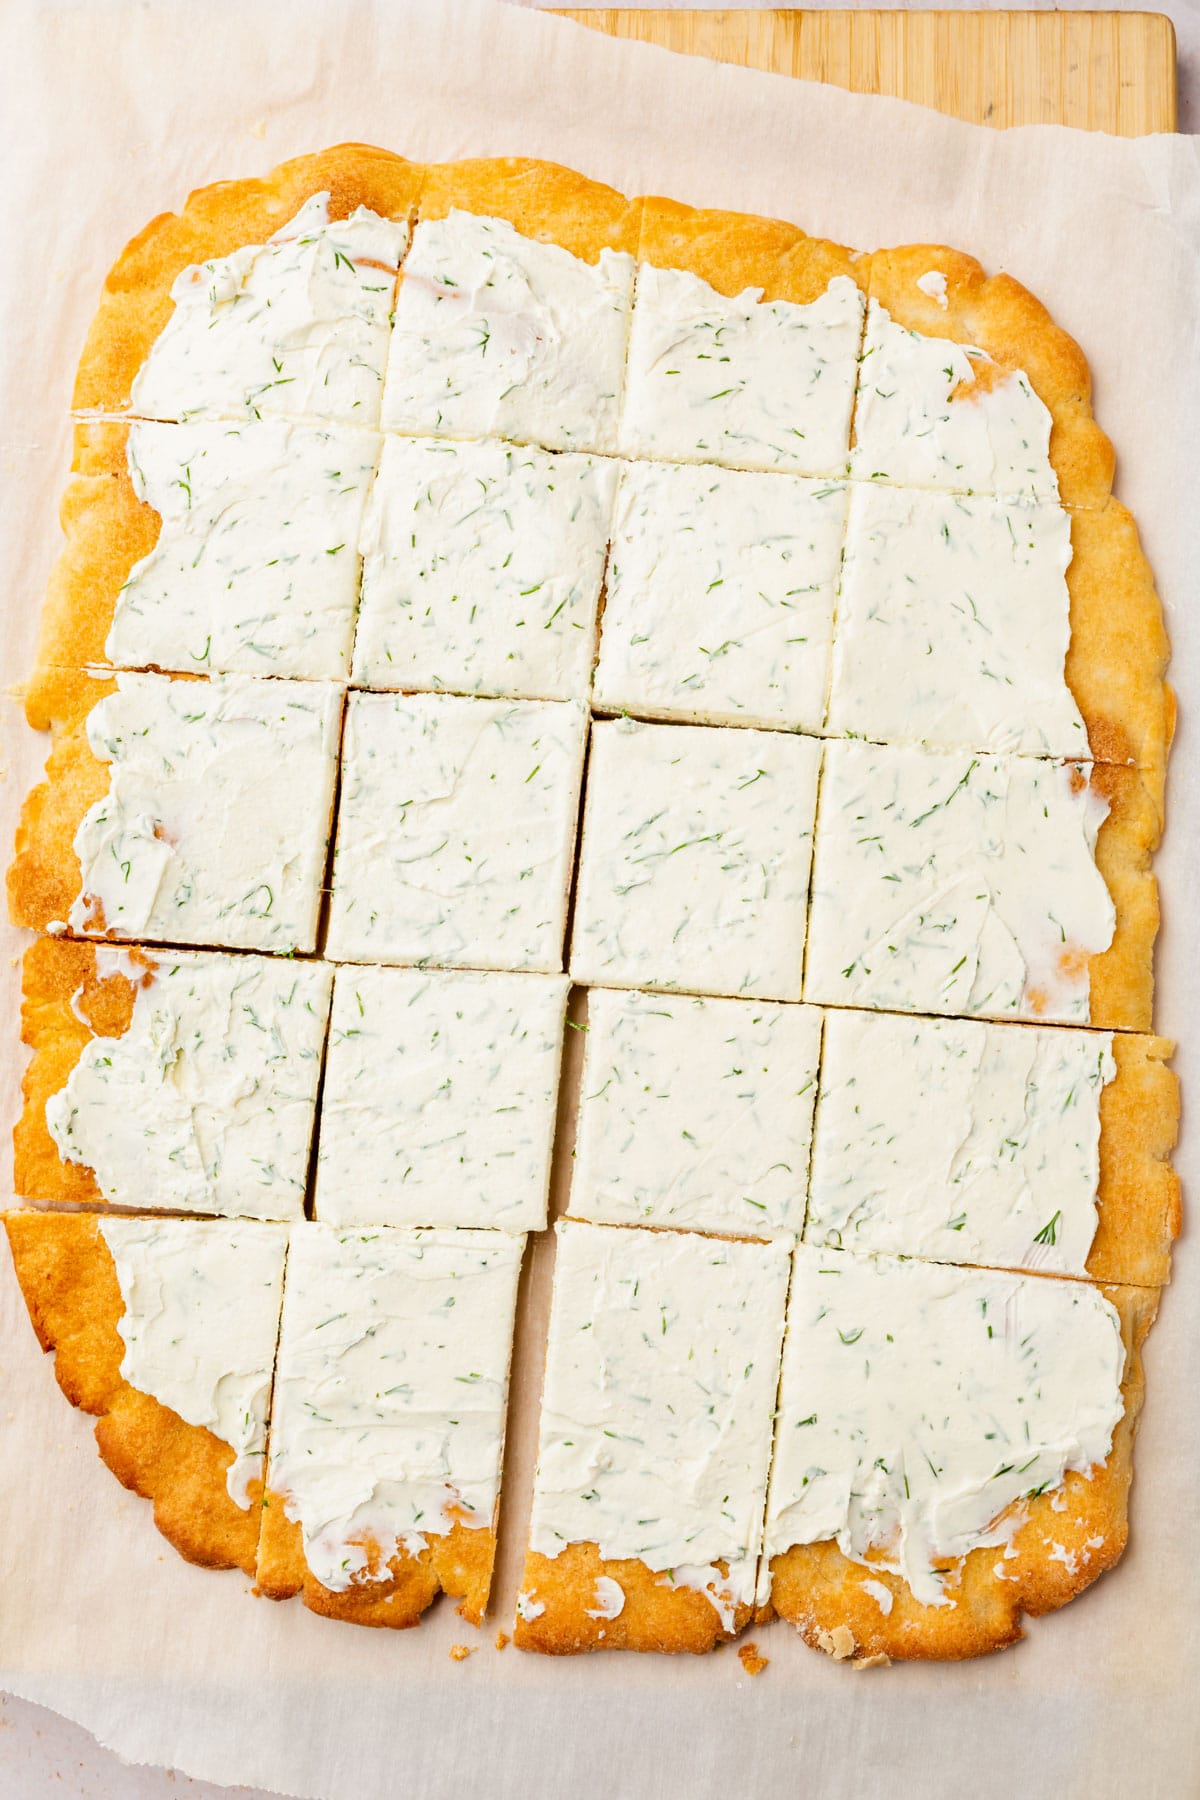 Rectangular gluten-free pizza dough topped with dill cream cheese and cut into 20 squares.